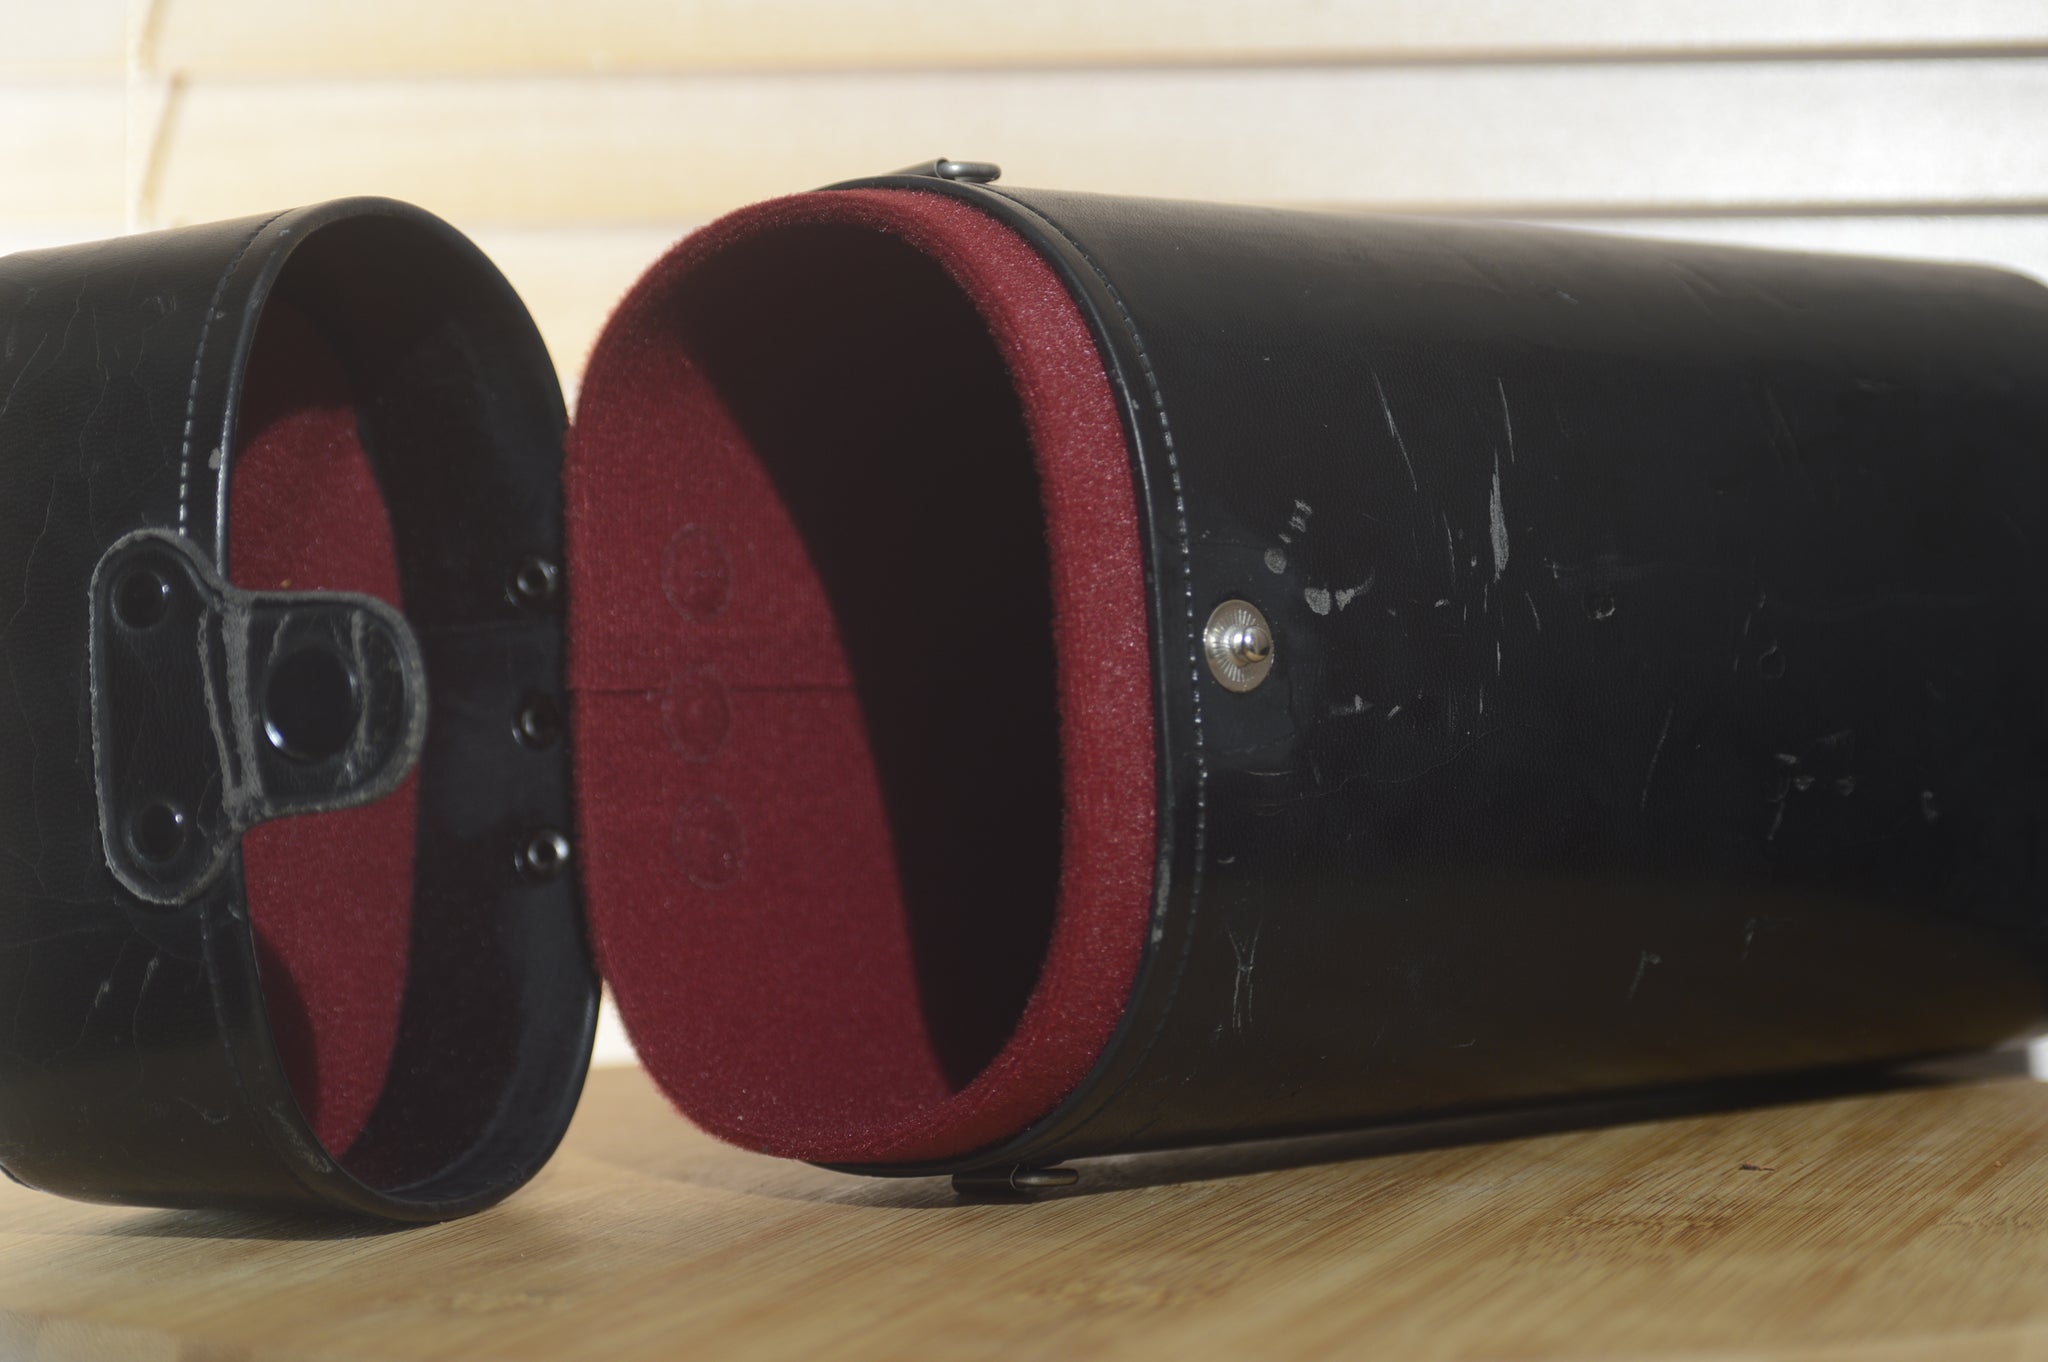 Canon Hard Leather Lens Case. Perfect for protecting your Vintage lenses. Pair it with a Zoom Lens. - RewindCameras quality vintage cameras, fully tested and serviced